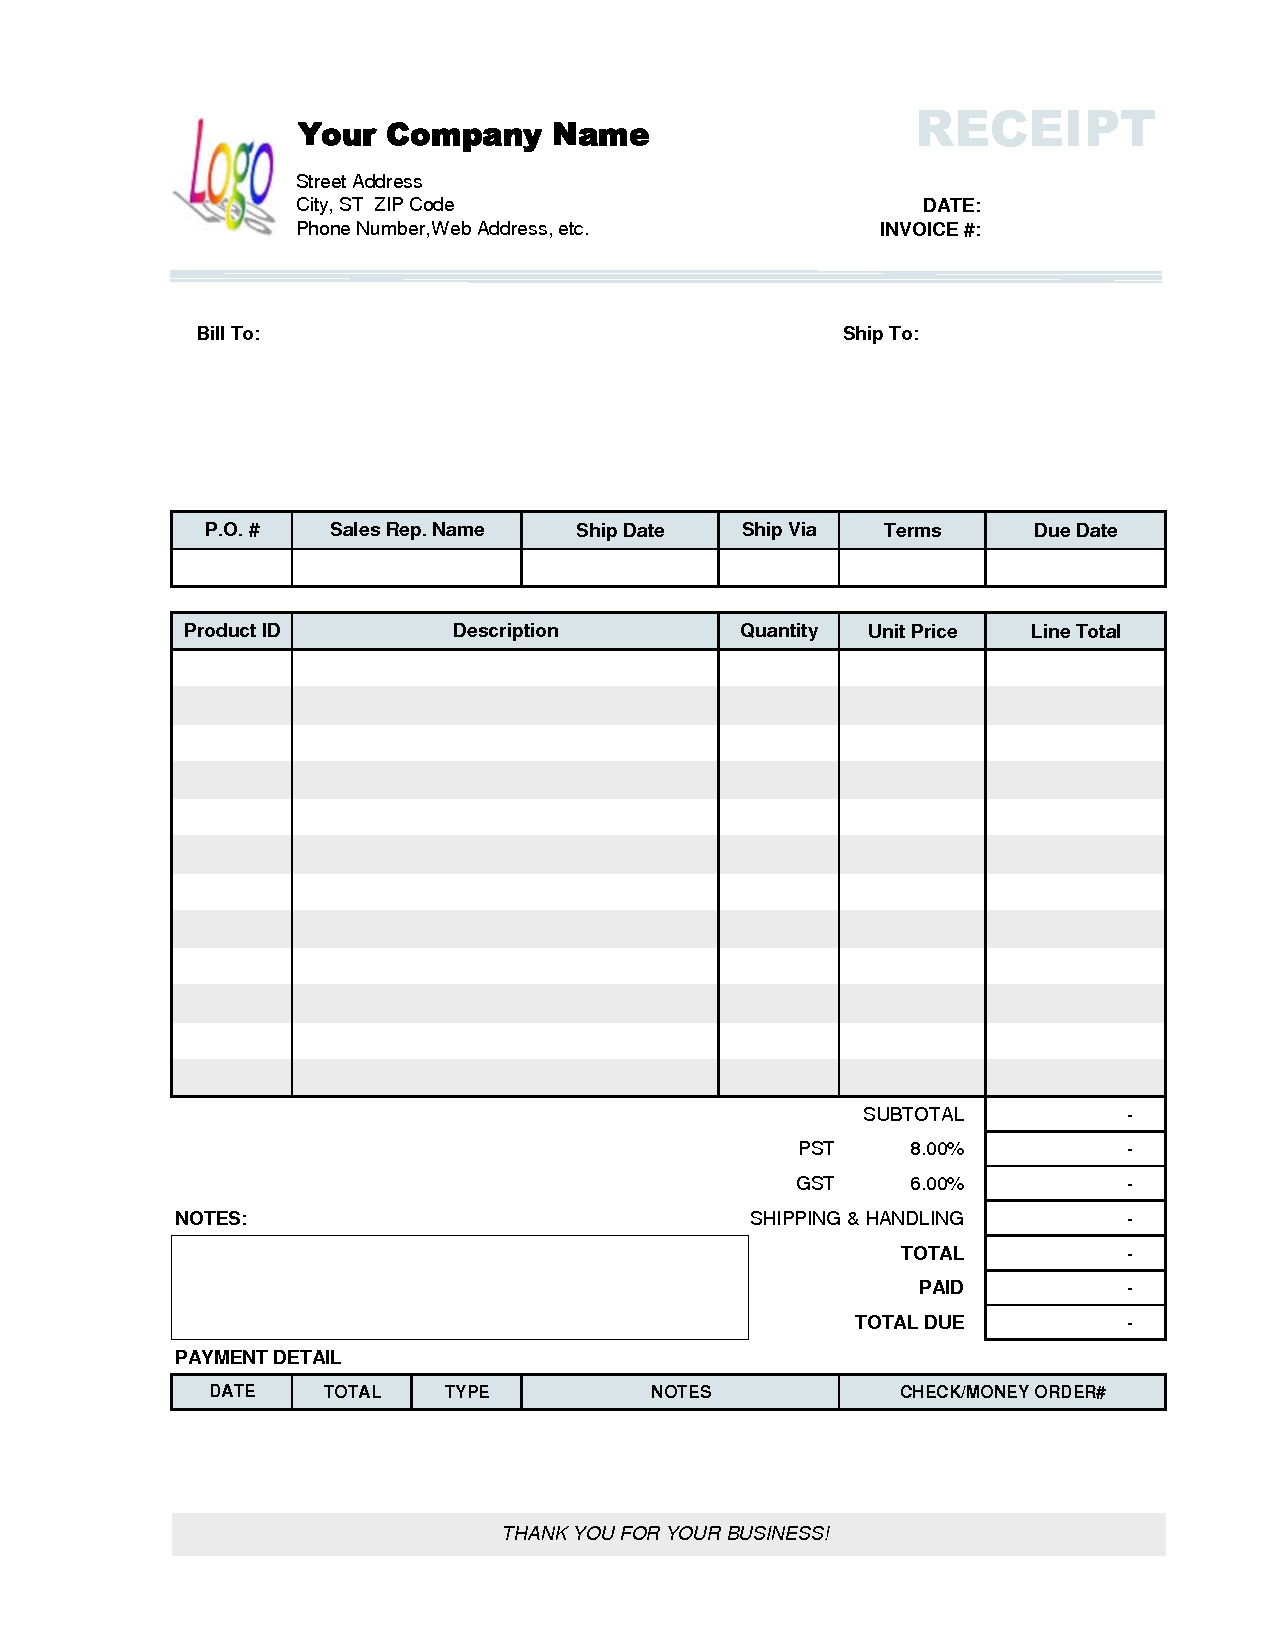 Template Of Paid Receipt